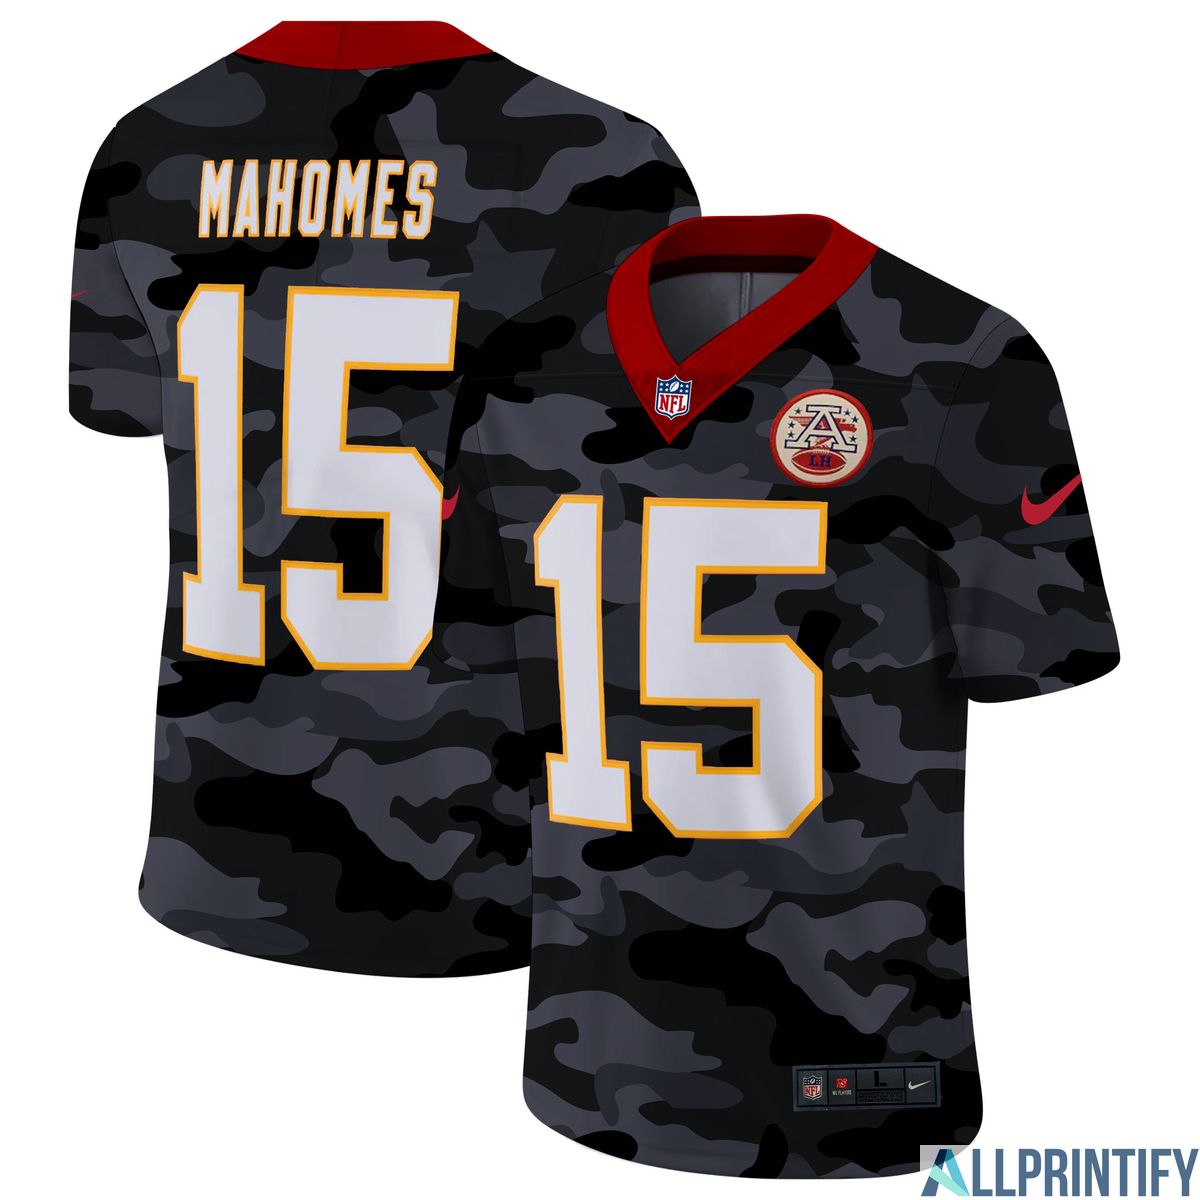 pat mahomes jersey number